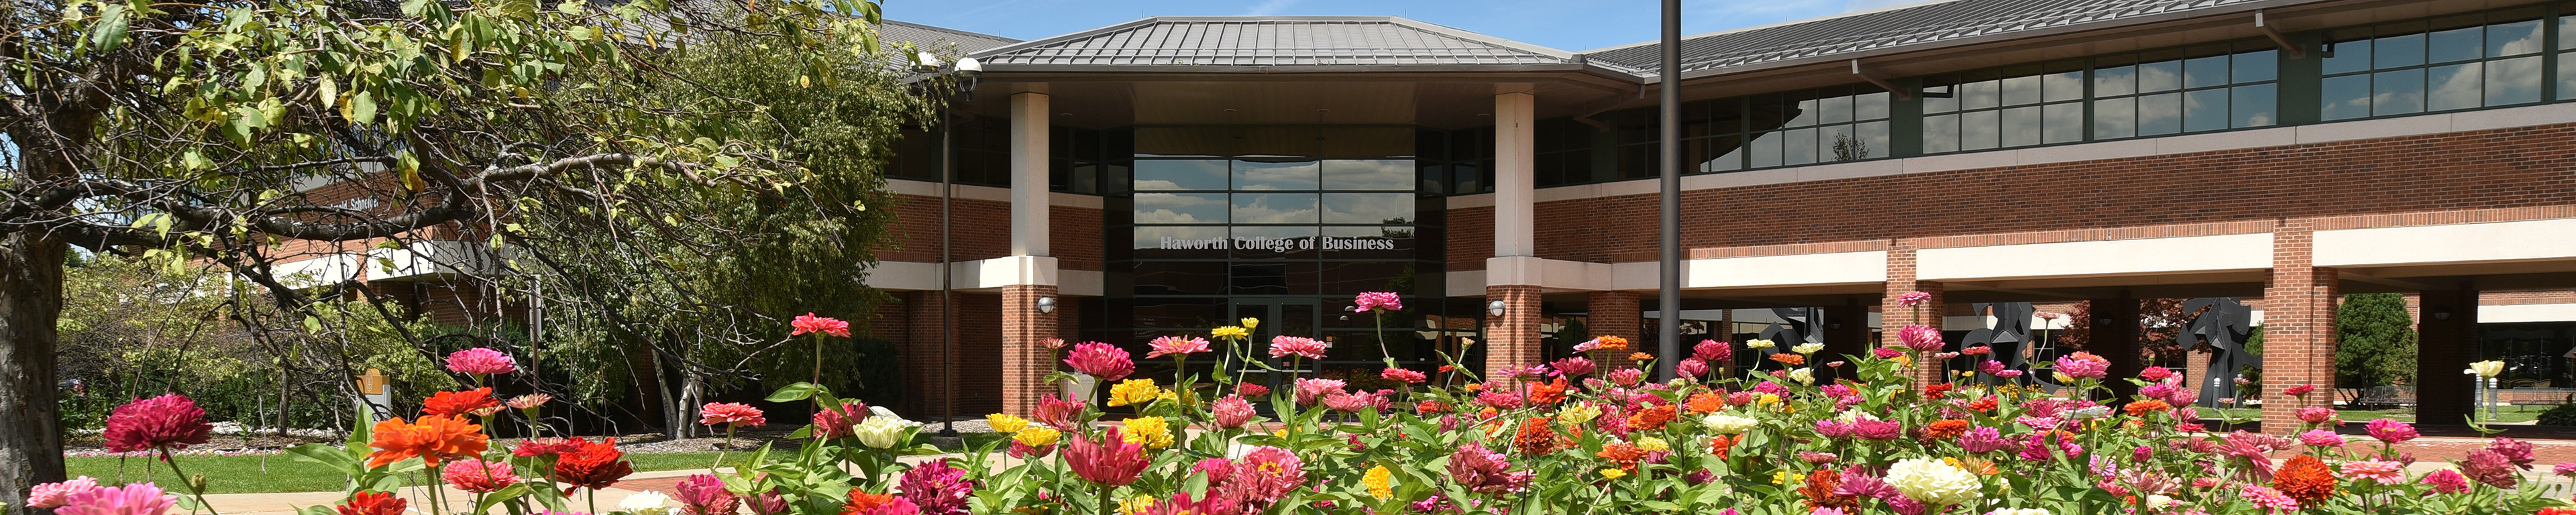 A spring day outside the Haworth College of Business with flowers in bloom.